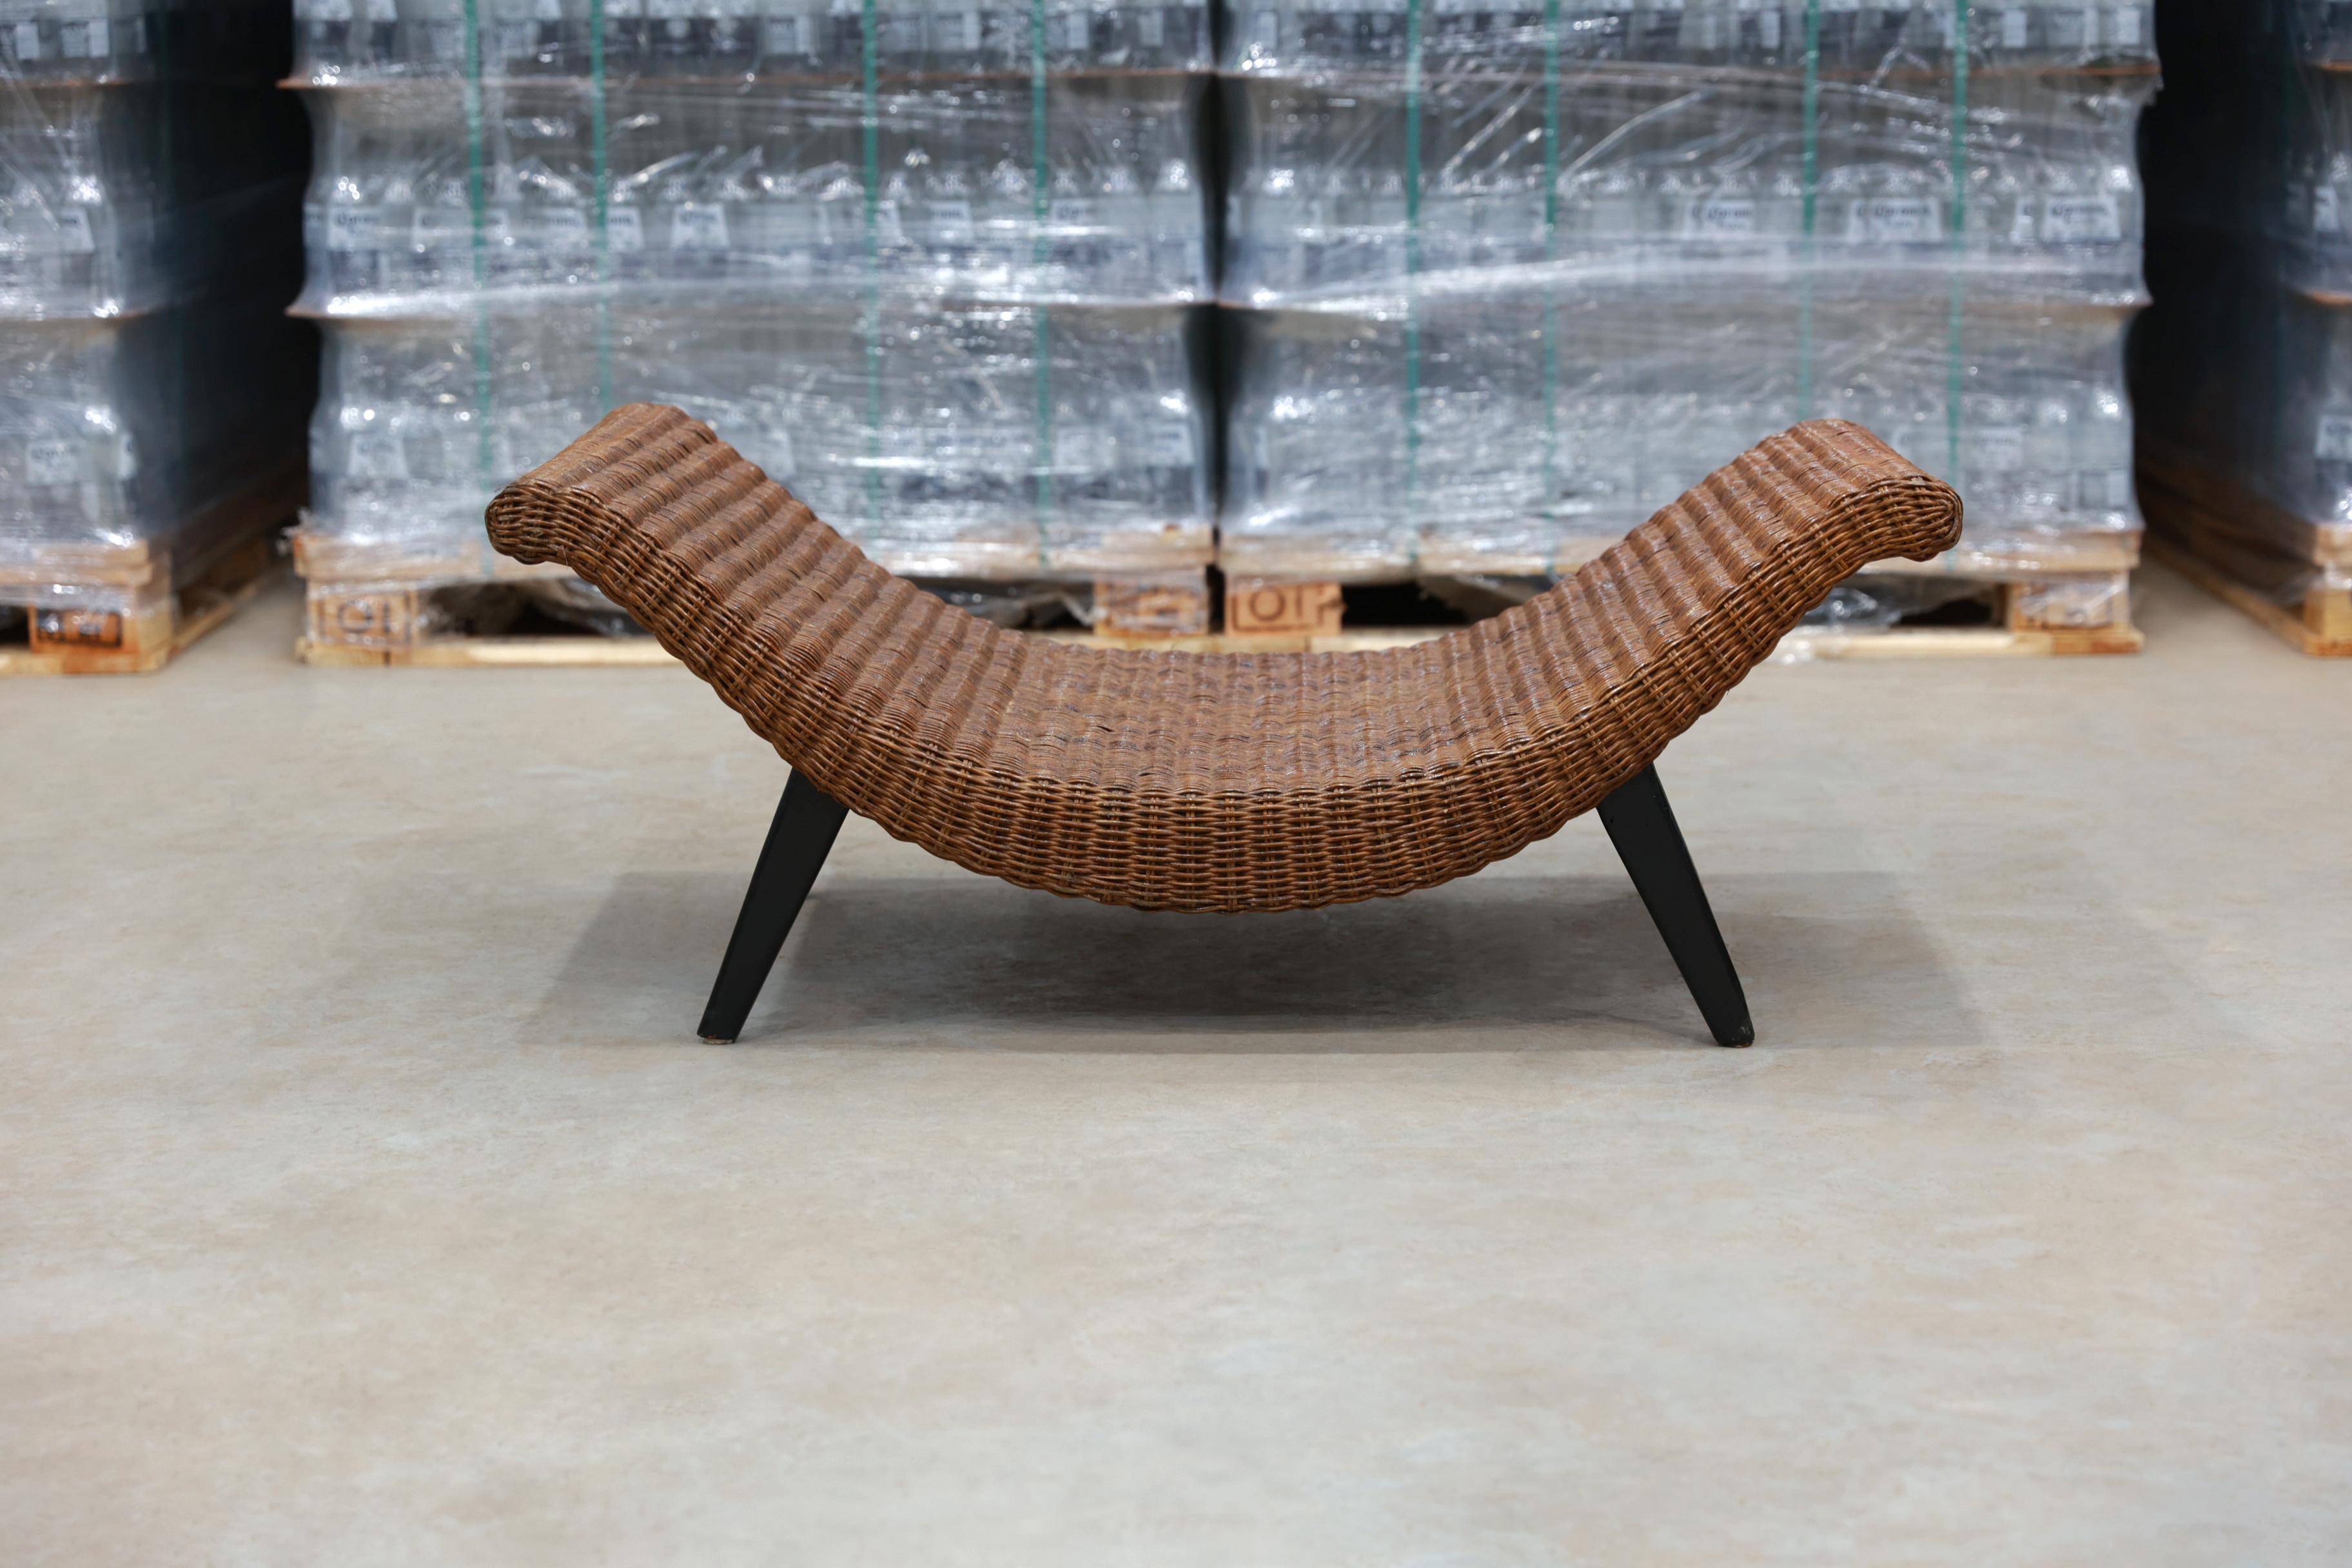 Available today this beautiful U-shaped Bench made in Hardwood and Wicker made in Brazil in the 1960s s nothing less than spectacular. 

This U-shaped bench was manufactured in the 1950s. The body of the bench is made of wicker and it is still